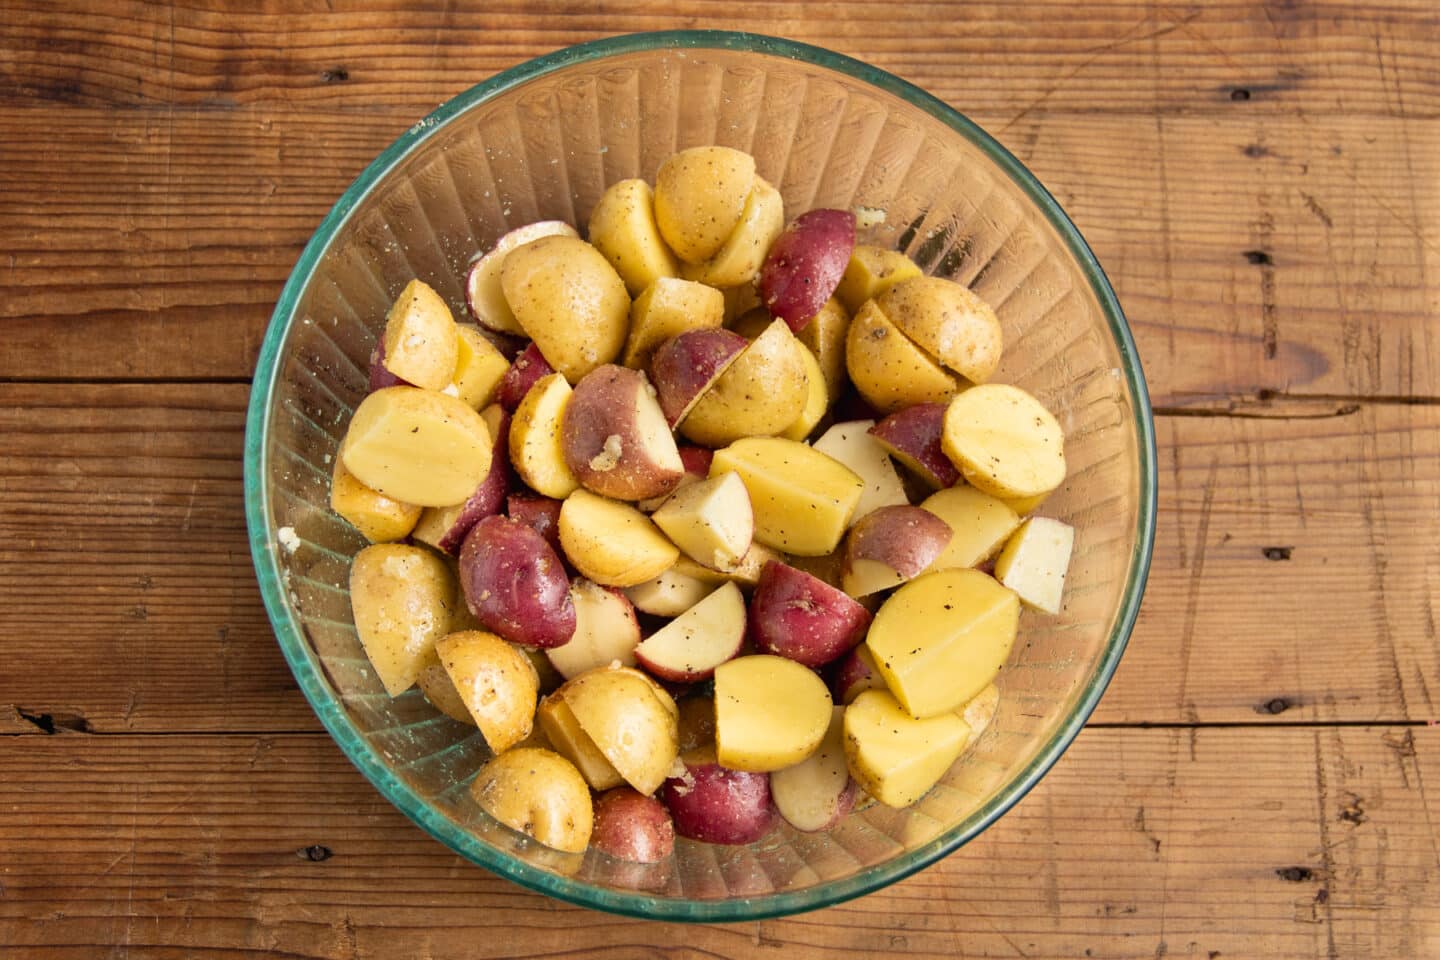 This is a picture of the chopped potatoes with seasoning in a bowl.